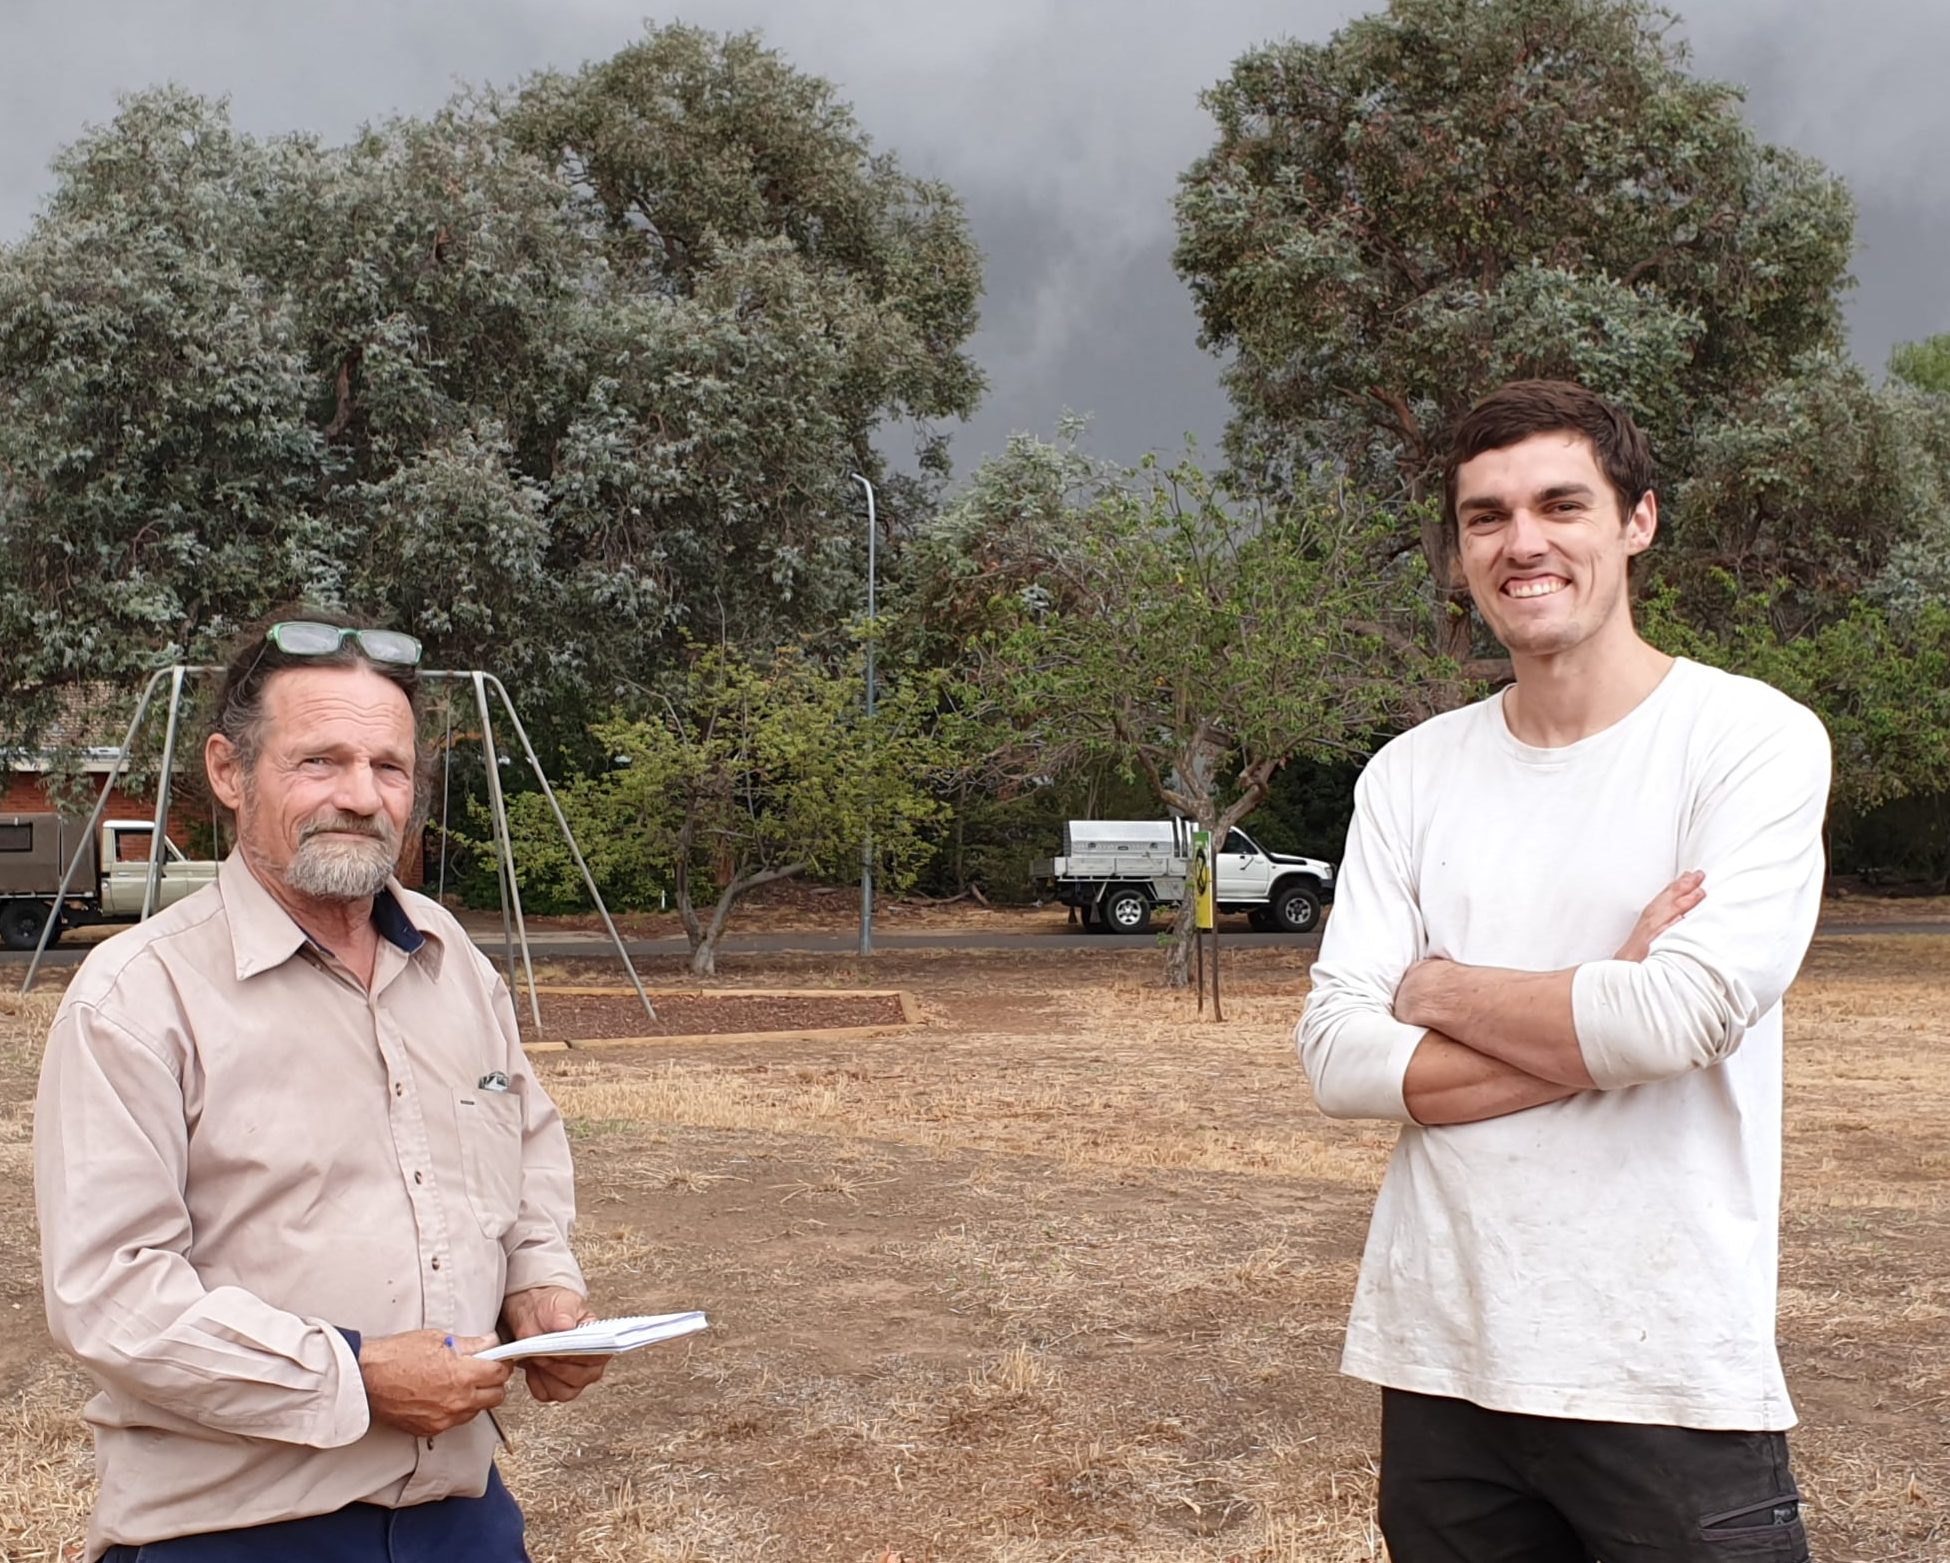 Water harvesting project to help turn Downer into green space